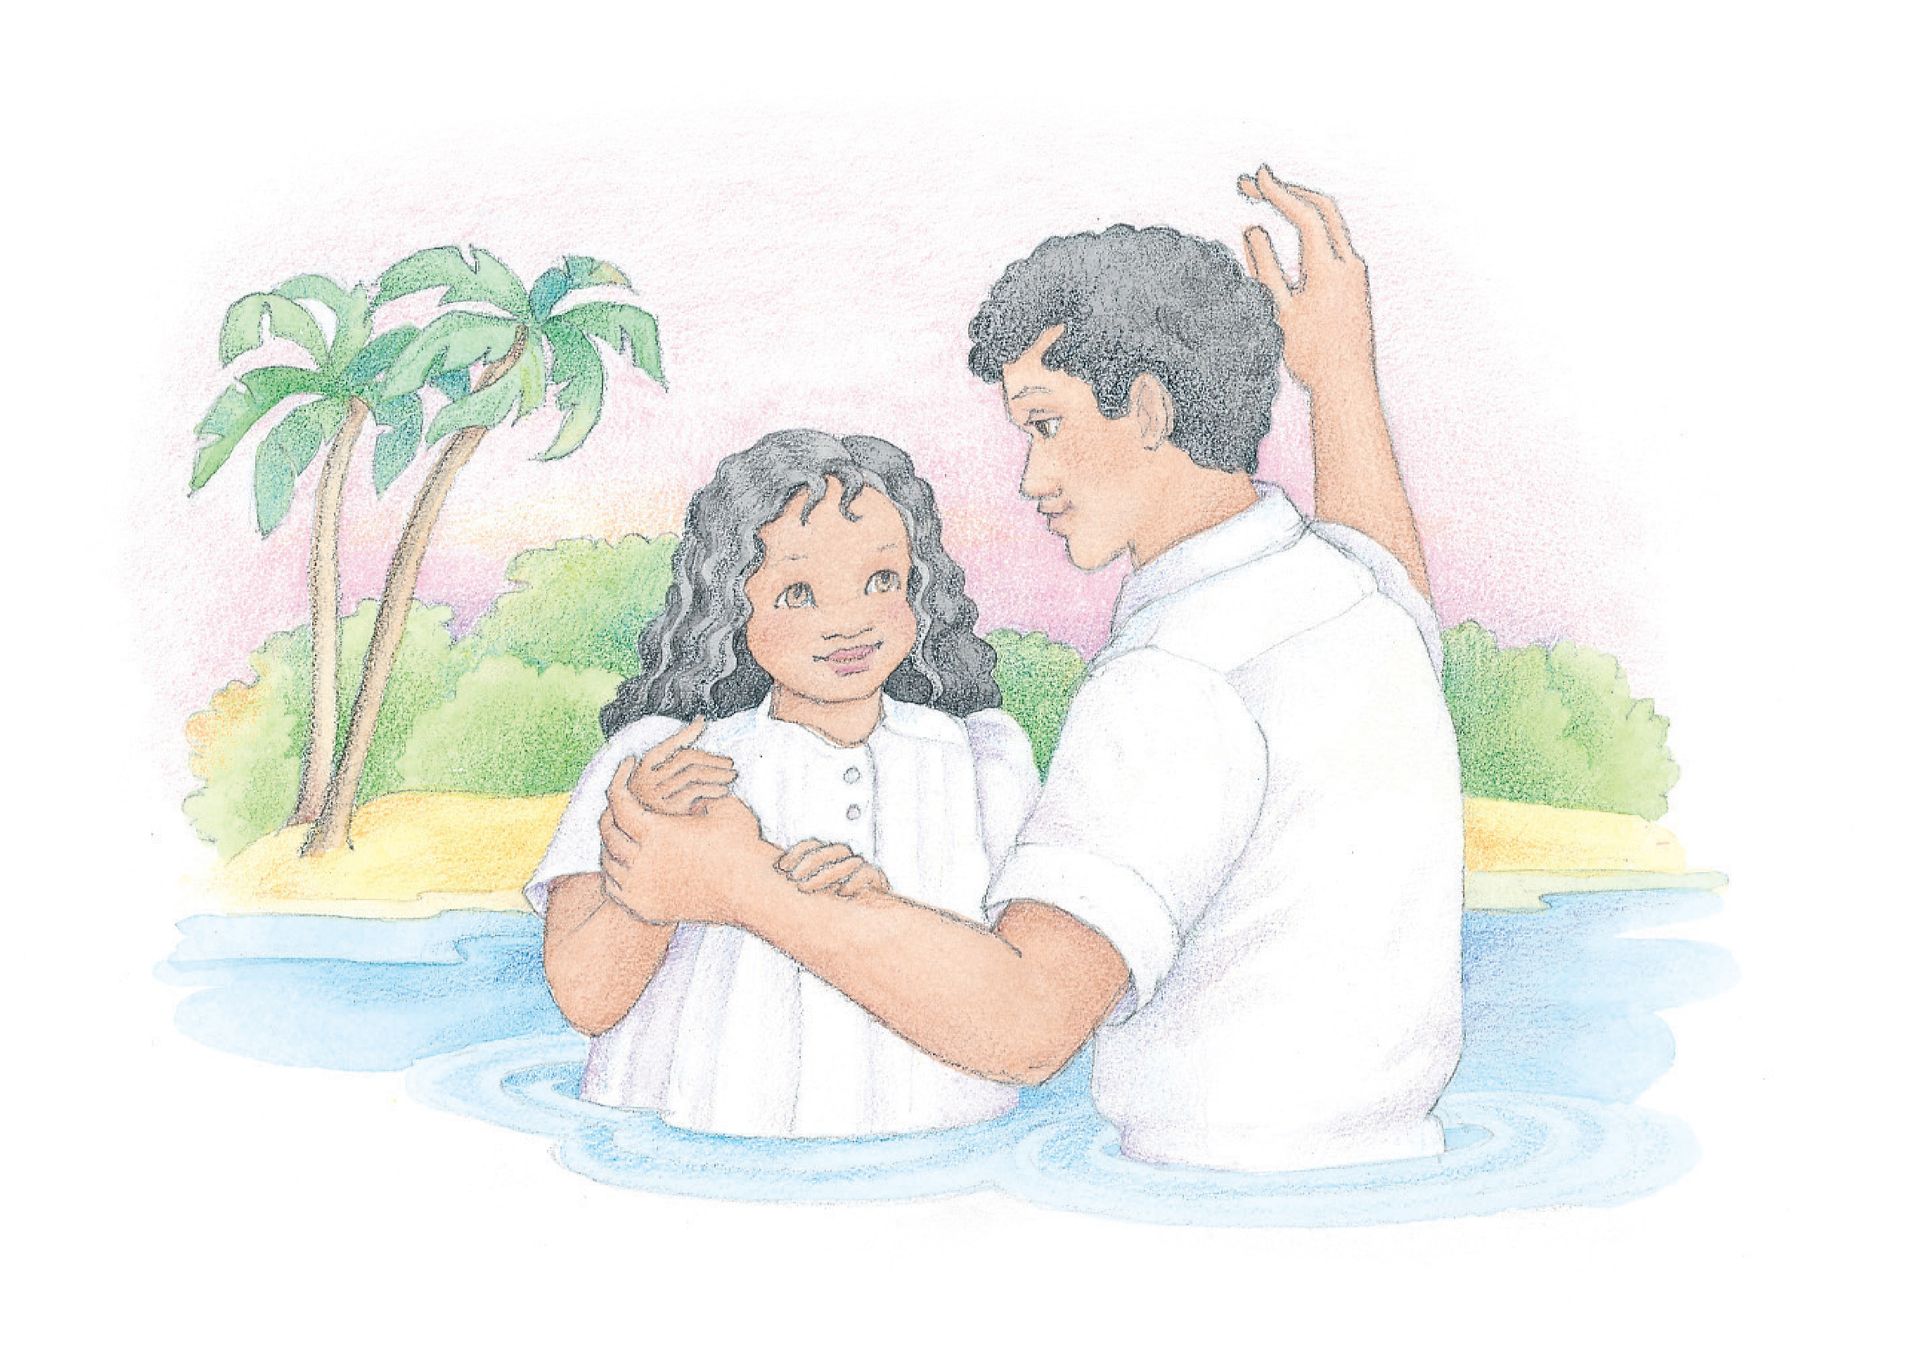 A girl being baptized by her father. From the Children’s Songbook, page 101, “Baptism”; watercolor illustration by Phyllis Luch.